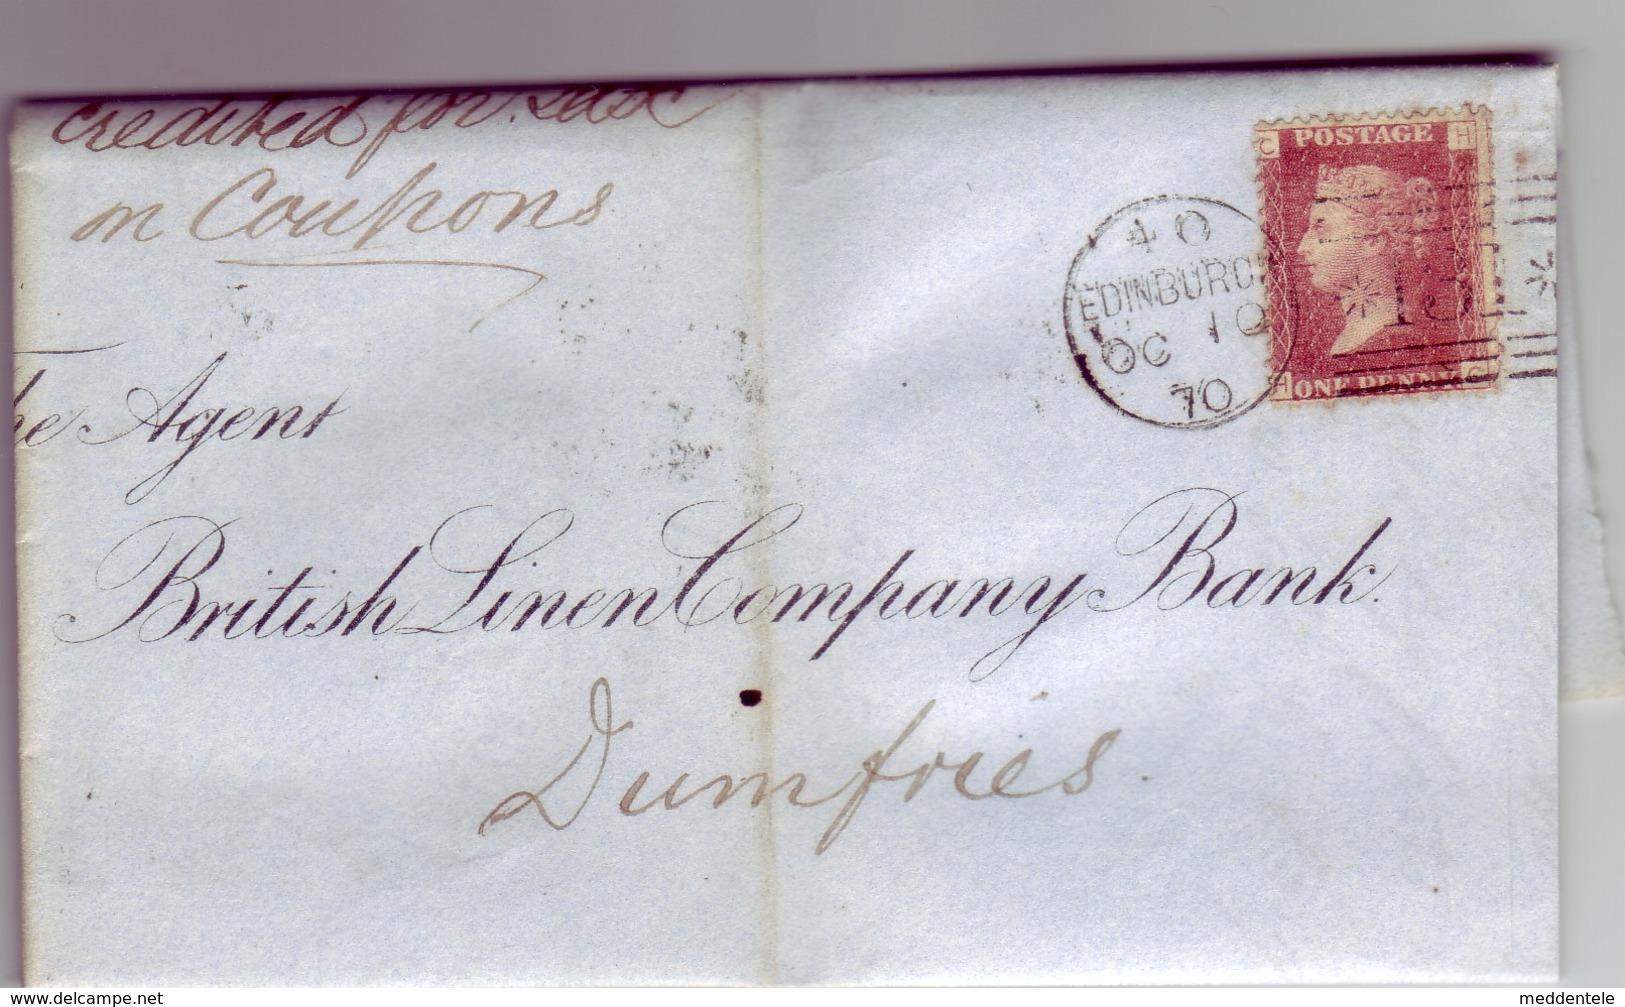 GB QV Scotland Cancel *131* EDINBURGH Plate 134, 10 OCTOBER 1870  To DUMFRIES Lettered CH/HC NICE/Clean - Covers & Documents